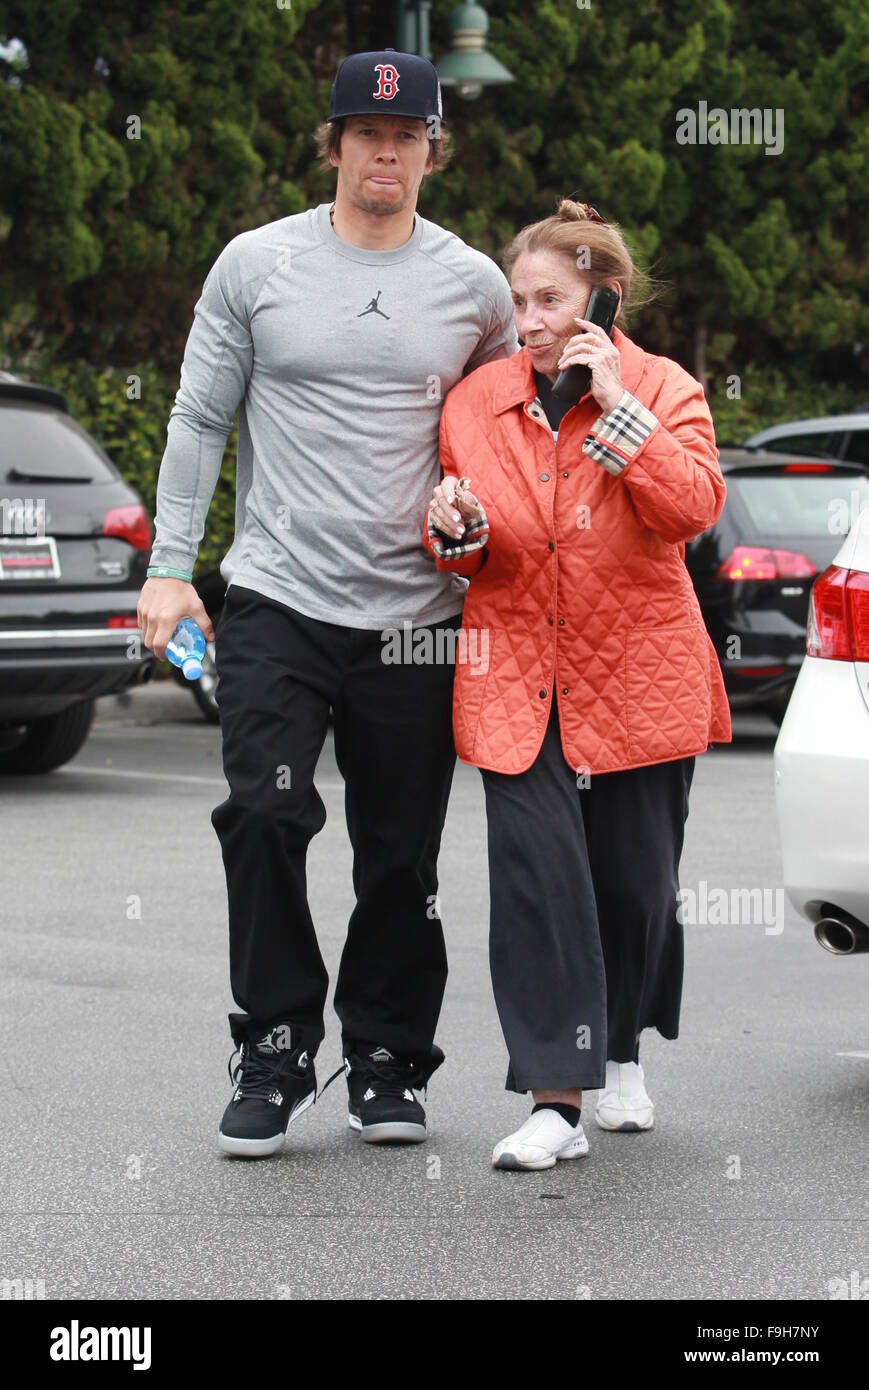 Mark Wahlberg showing his toned torso in a tight t-shirt with Nike  “Jumpman” logo for Air Jordan, goes shopping at Bristol Farms in Beverly  Hill Featuring: Mark Wahlberg Where: Los Angeles, California,